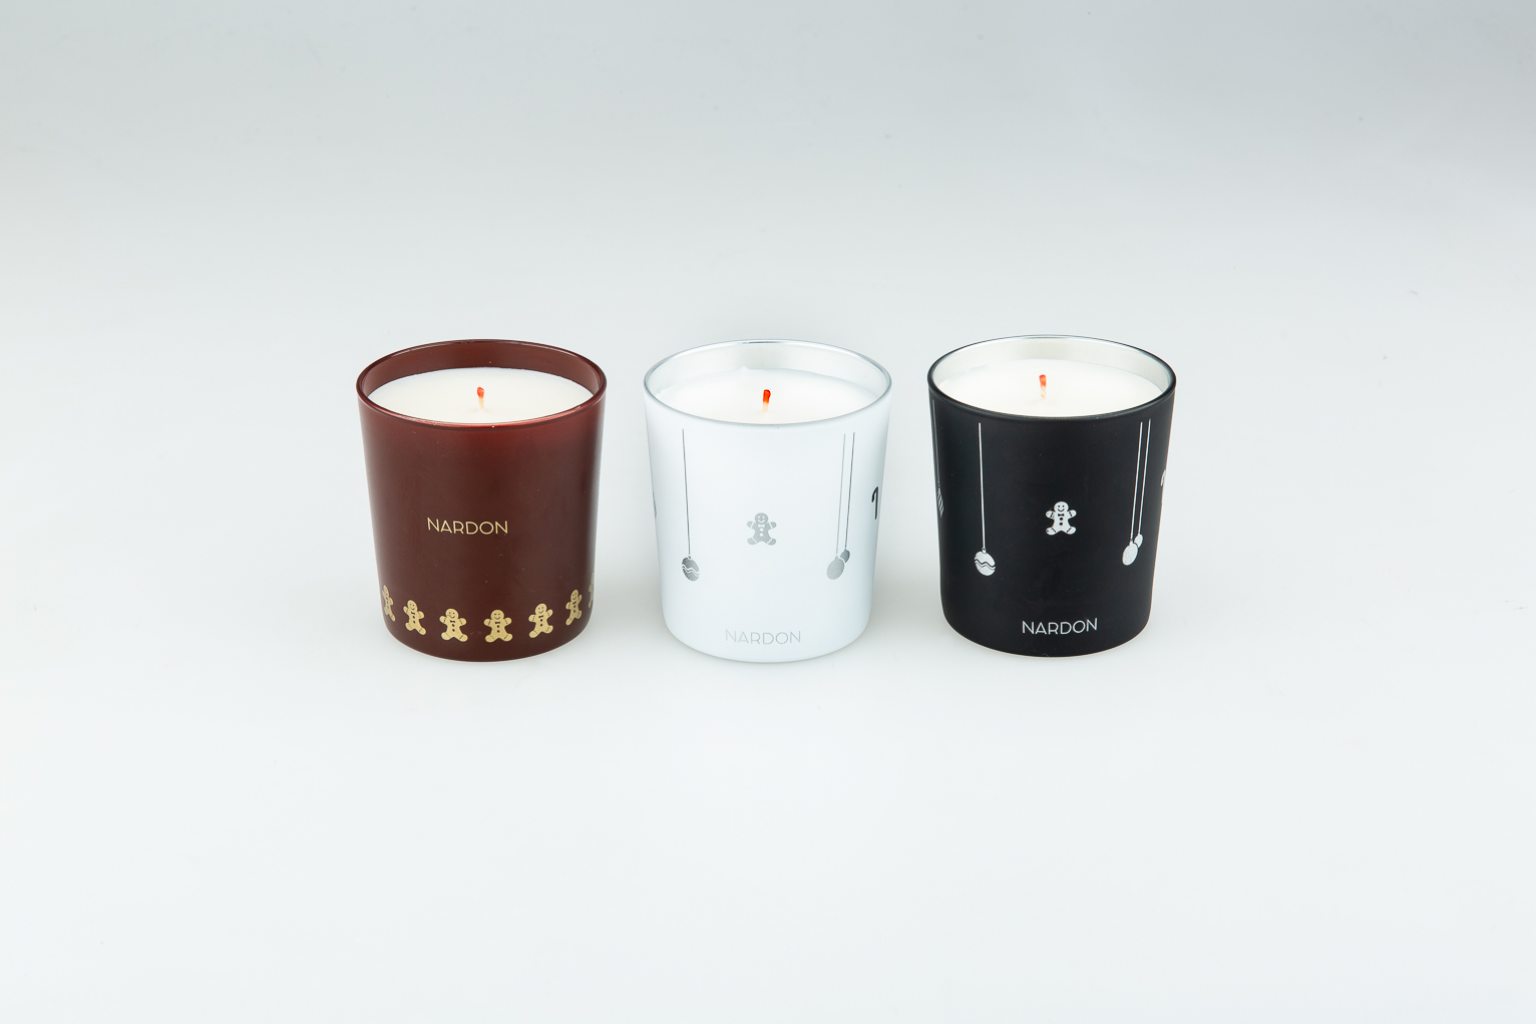 Moroccan spices scented candle